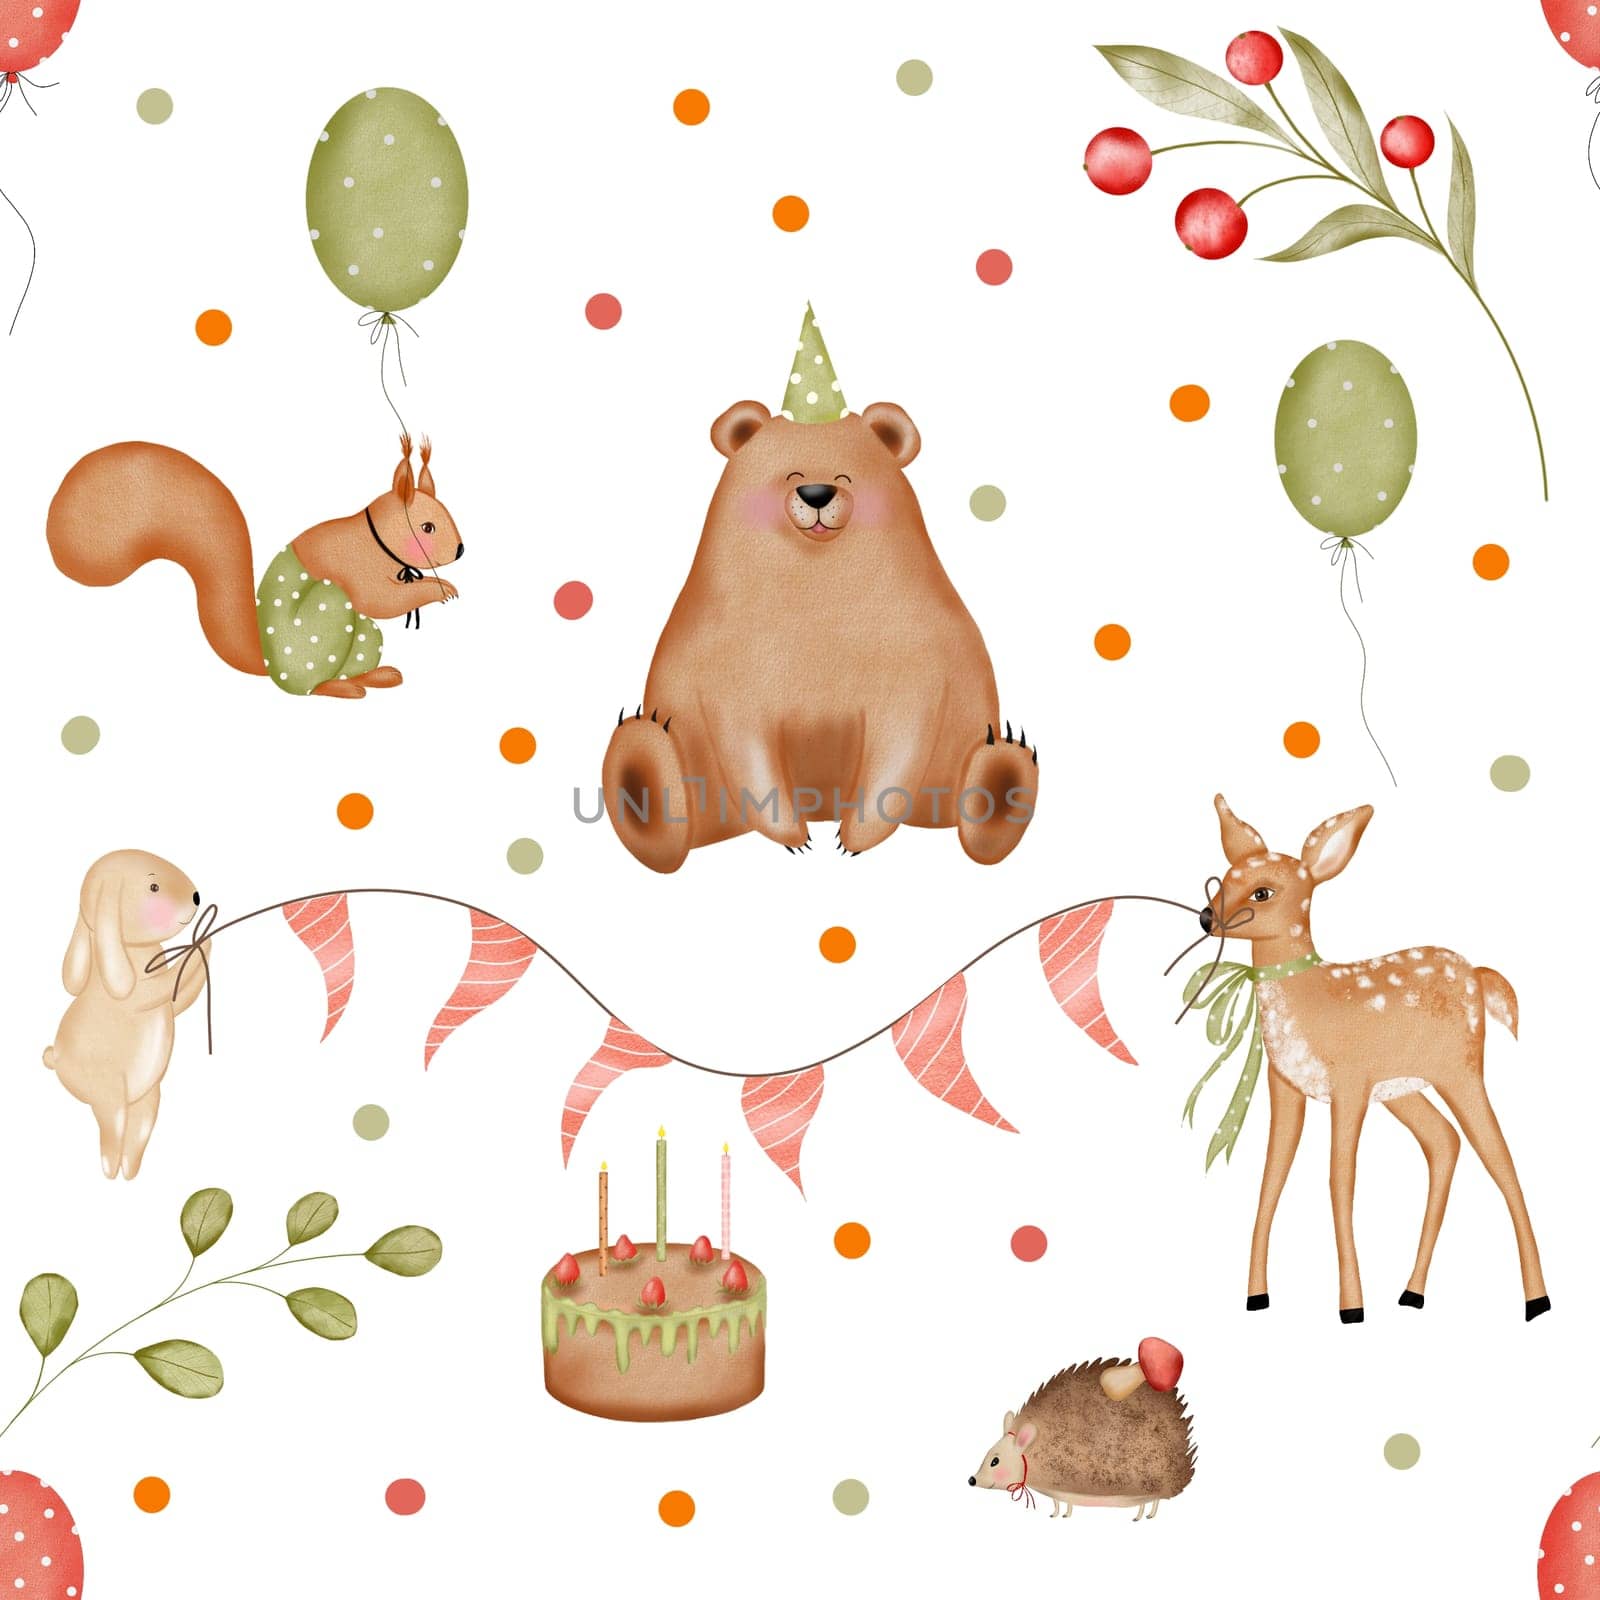 Watercolor seamless pattern forest animals for birthday with colorful confetti. Cute bear with cake. Fawn and bunny with garlands. A squirrel with a balloon and a hedgehog with mushrooms. Kawaii design for printing on children's textiles and wrapping paper by TatyanaTrushcheleva